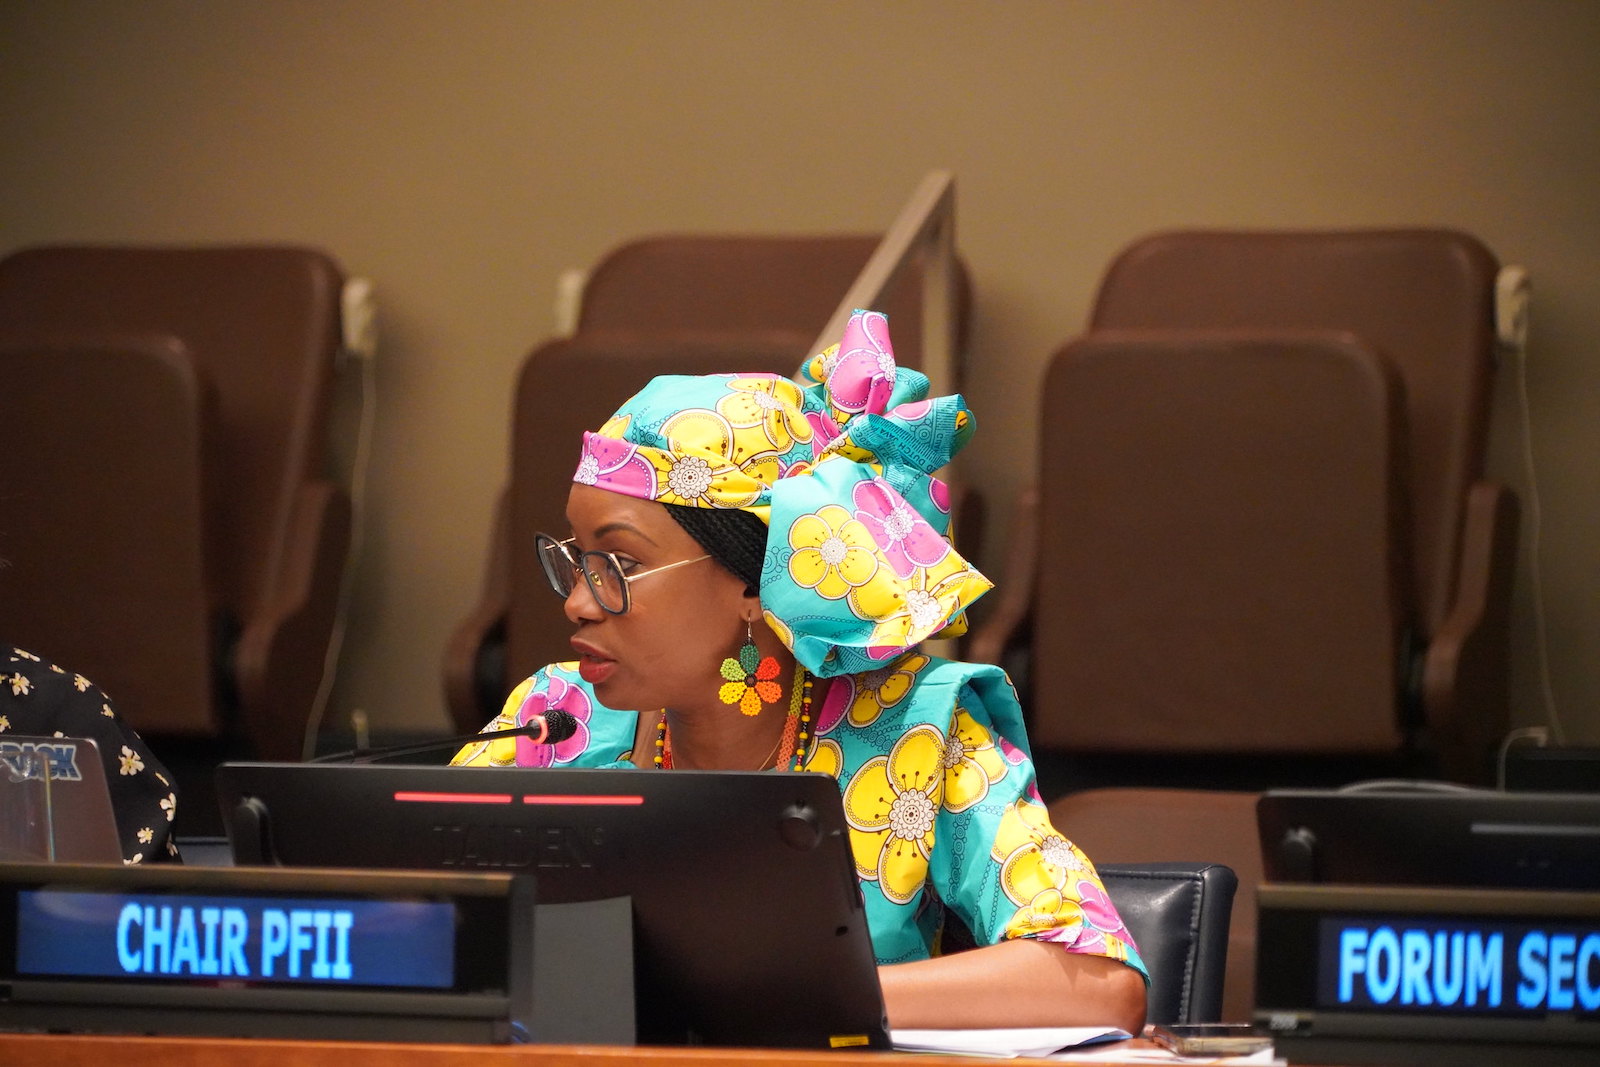 A woman wears a matching floral shirt and cloth headdress and sits at a desk with a label that says Chair PFII